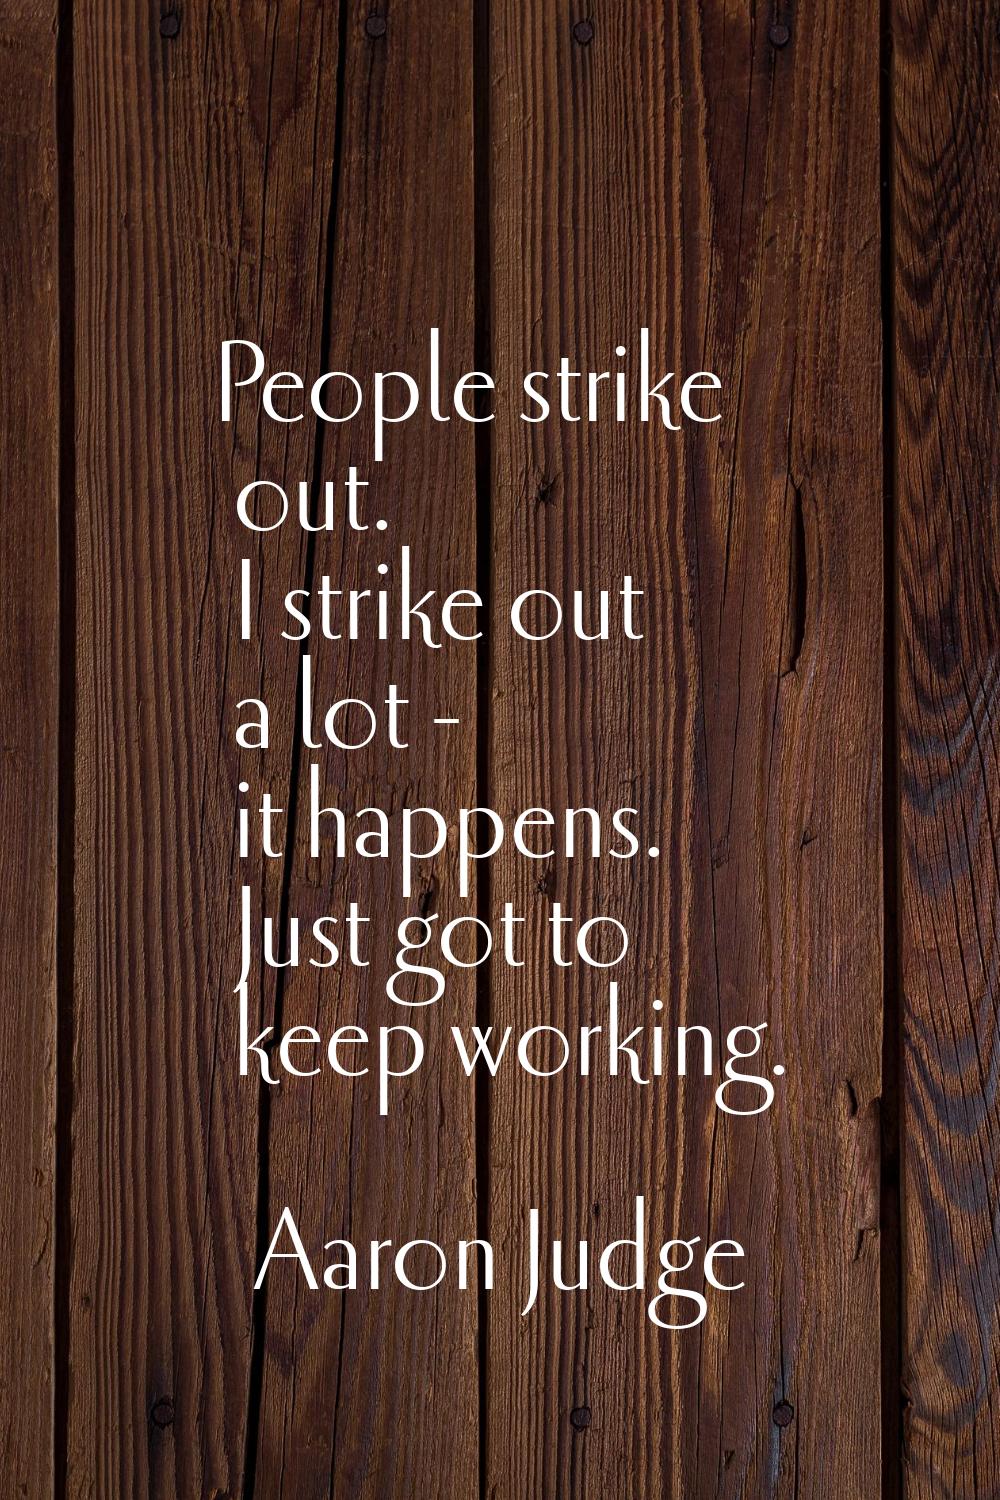 People strike out. I strike out a lot - it happens. Just got to keep working.